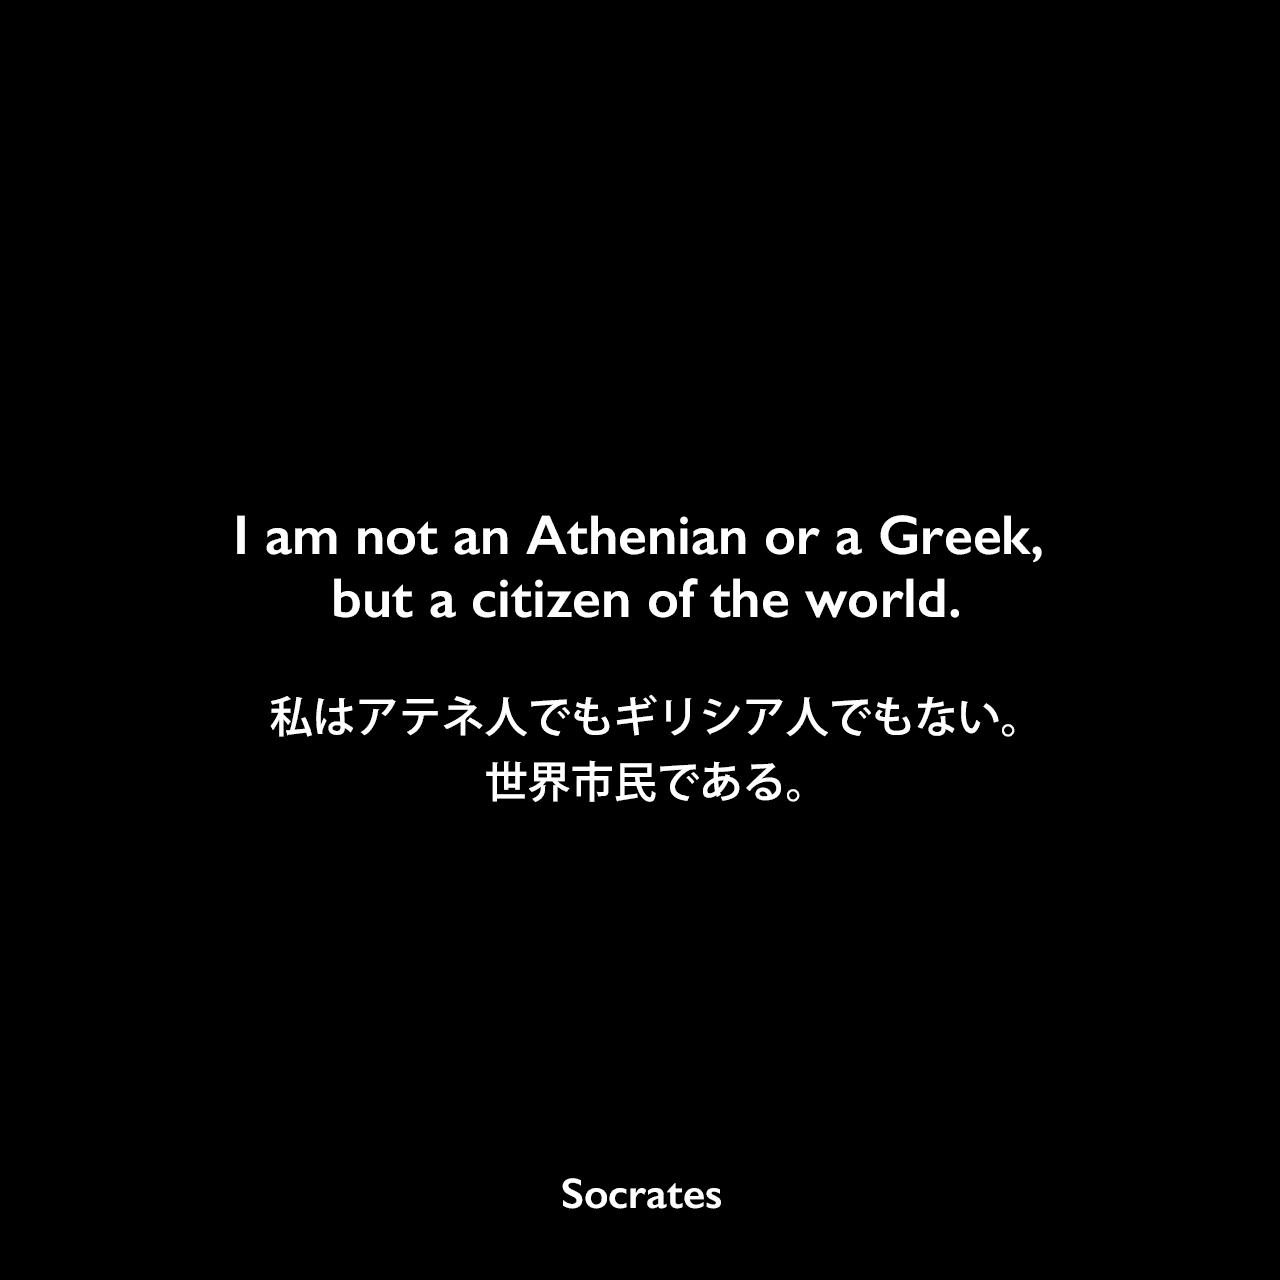 I am not an Athenian or a Greek, but a citizen of the world.私はアテネ人でもギリシア人でもない。世界市民である。- プルタルコスがソクラテスの言葉として引用Socrates